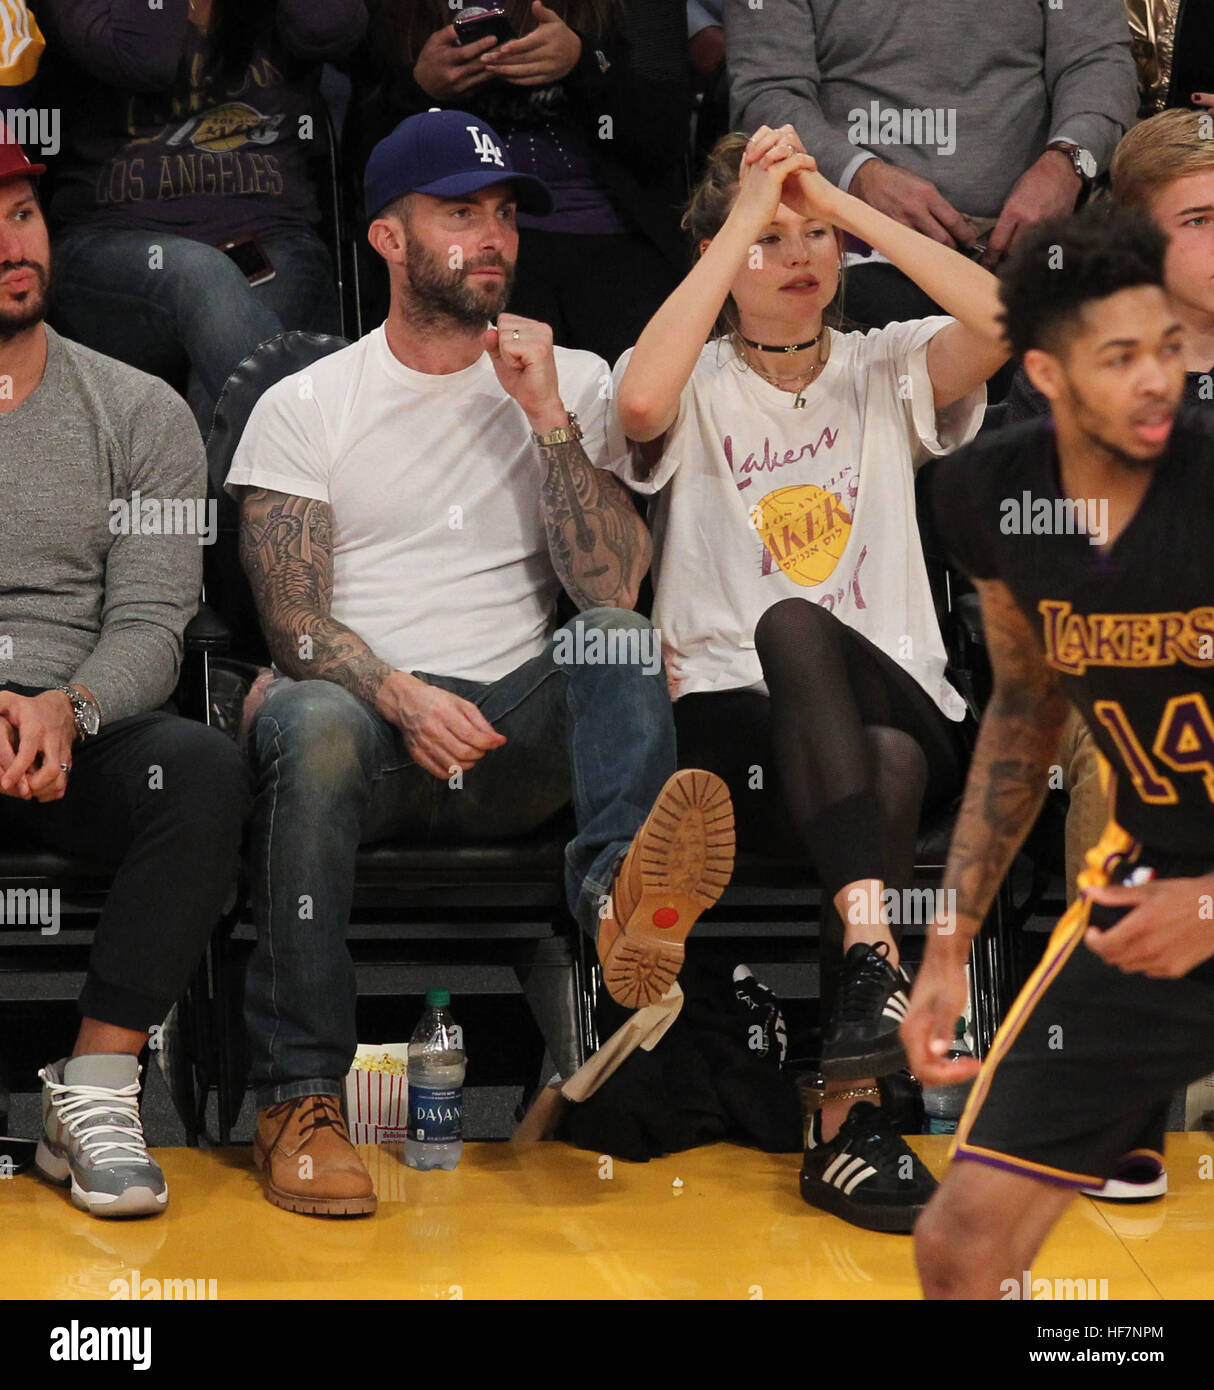 Celebrities at the Los Angeles Lakers game. The Golden State Warriors defeated the Los Angeles Lakers by the final score of 109-85 at the Staples Center in Los Angeles  Featuring: Adam Levine, Behati Prinsloo Where: Los Angeles, California, United States Stock Photo